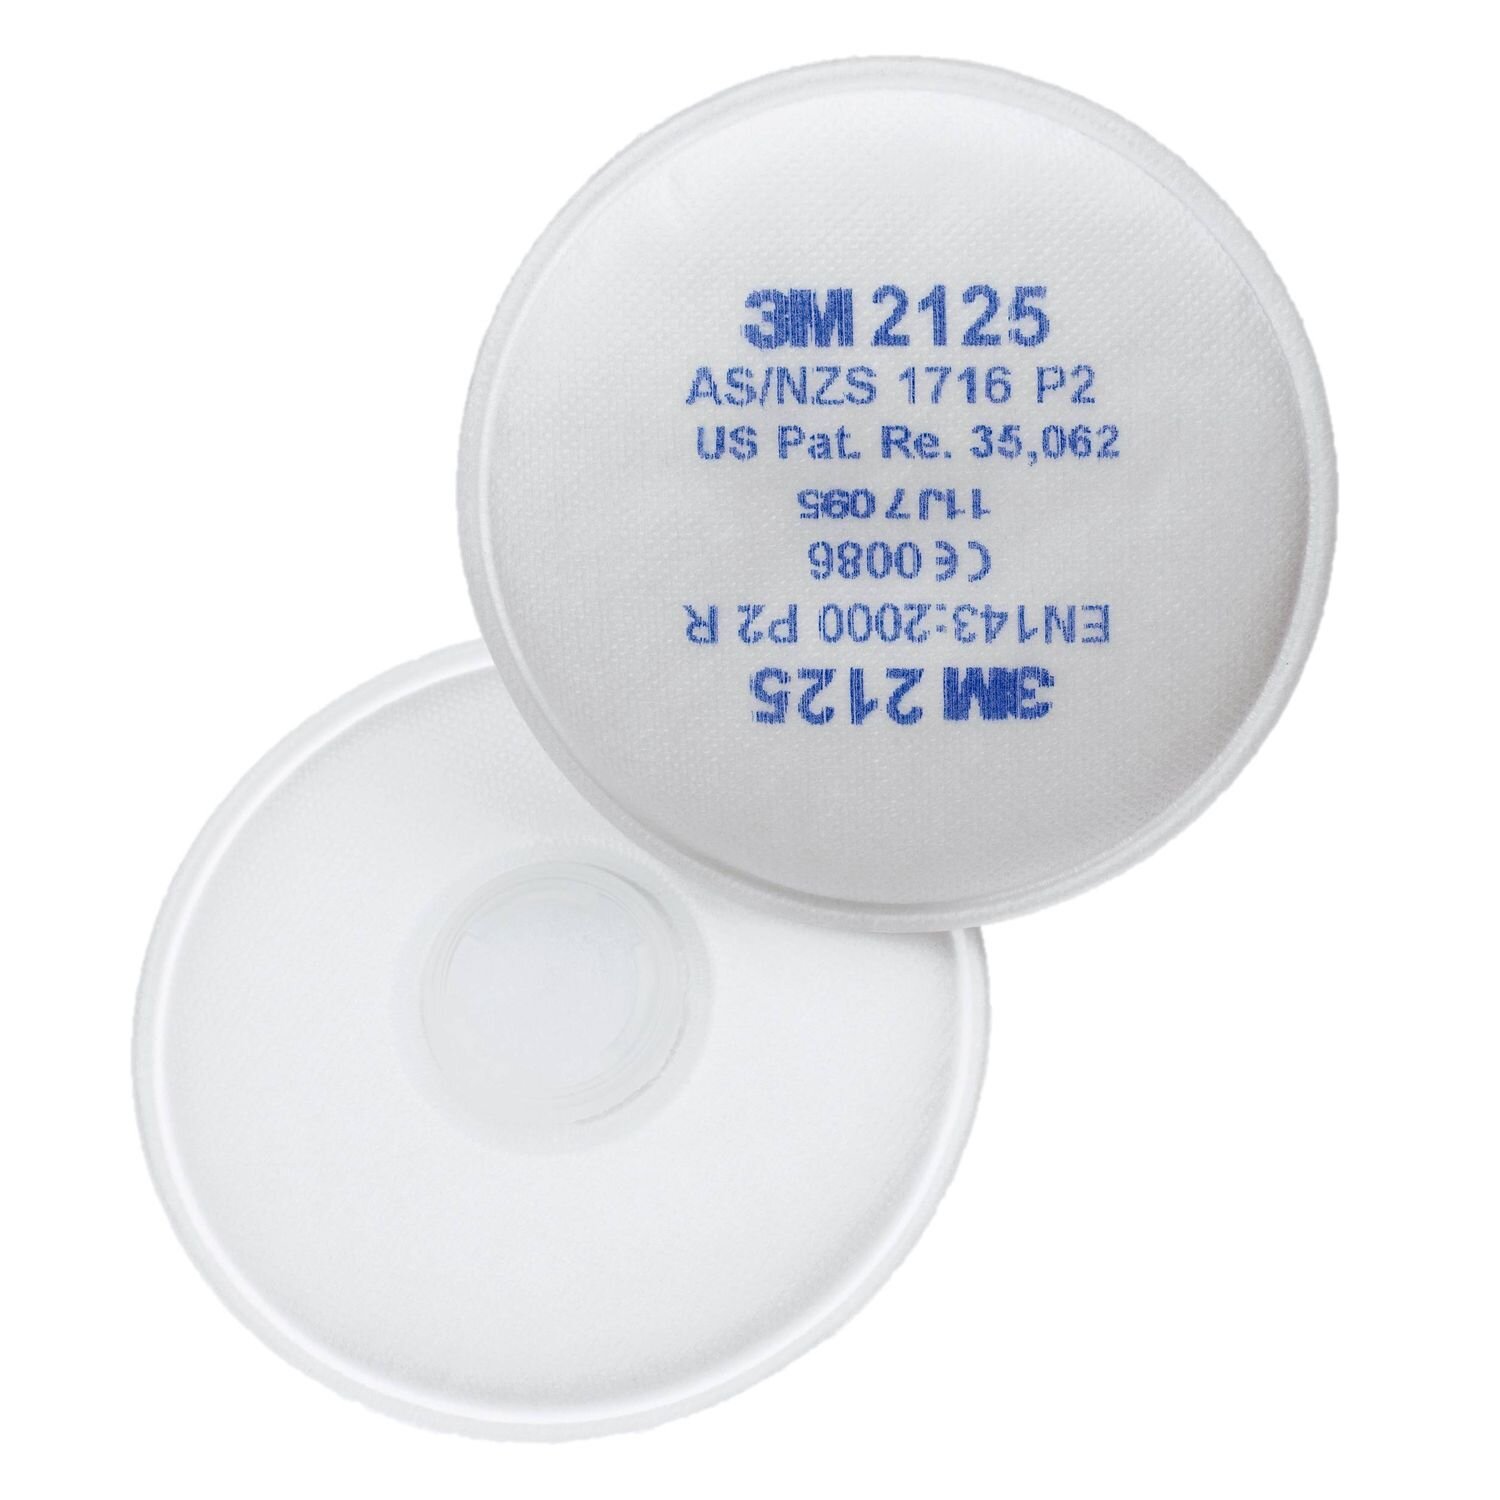 3M 2125 P2 Filter - Pair OUT OF STOCK